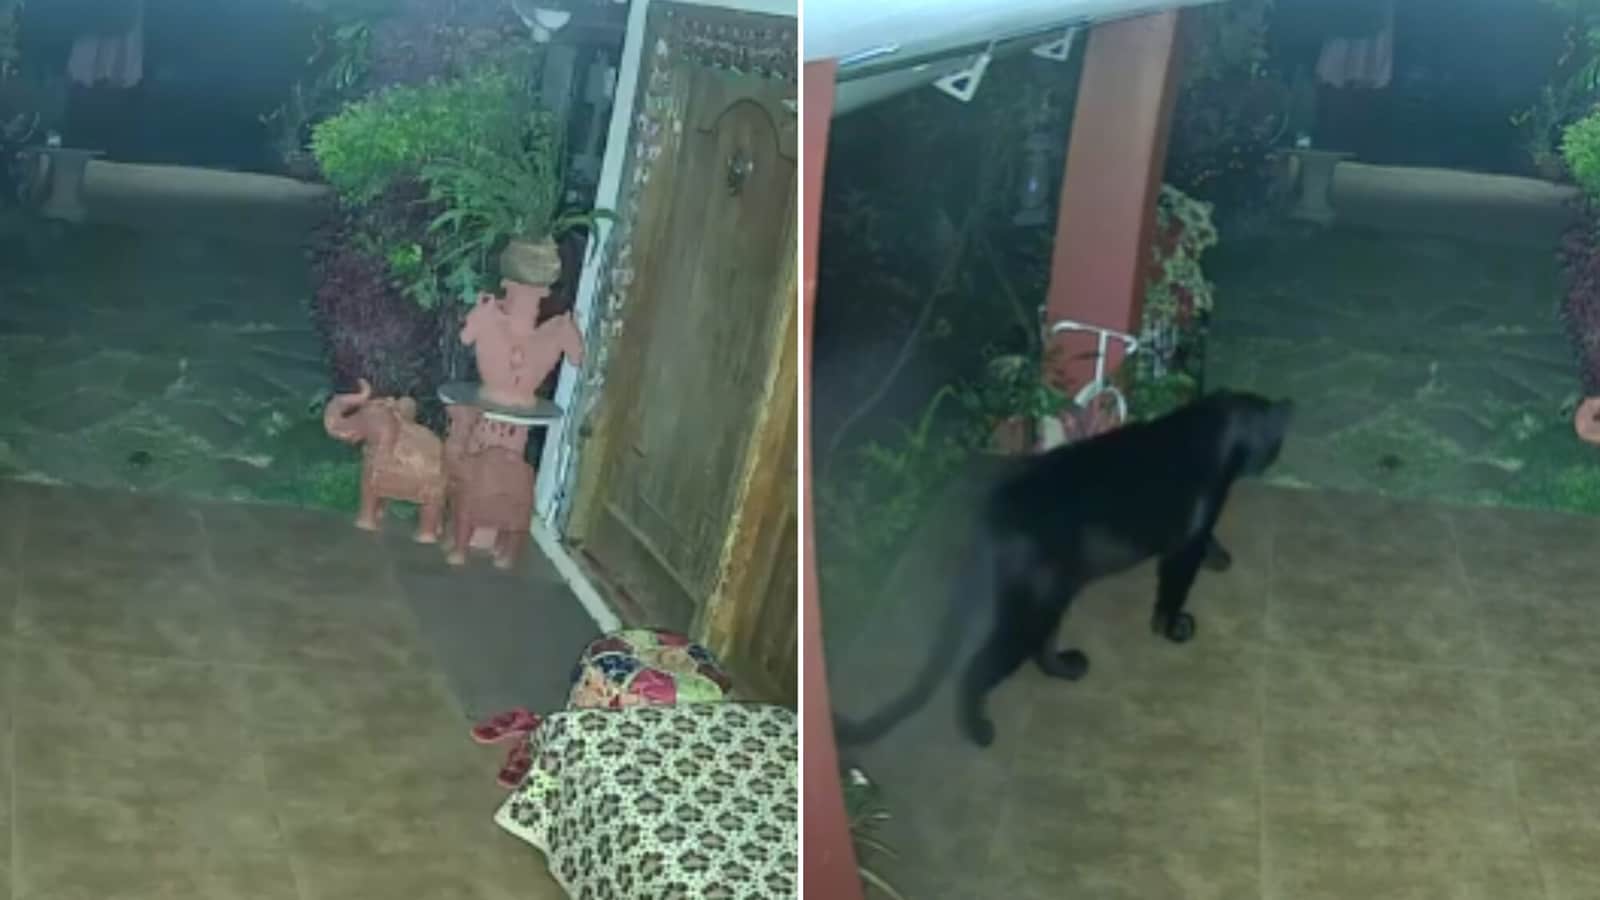 Black panther stealthily enters house, roams around. Scary video will give you goosebumps